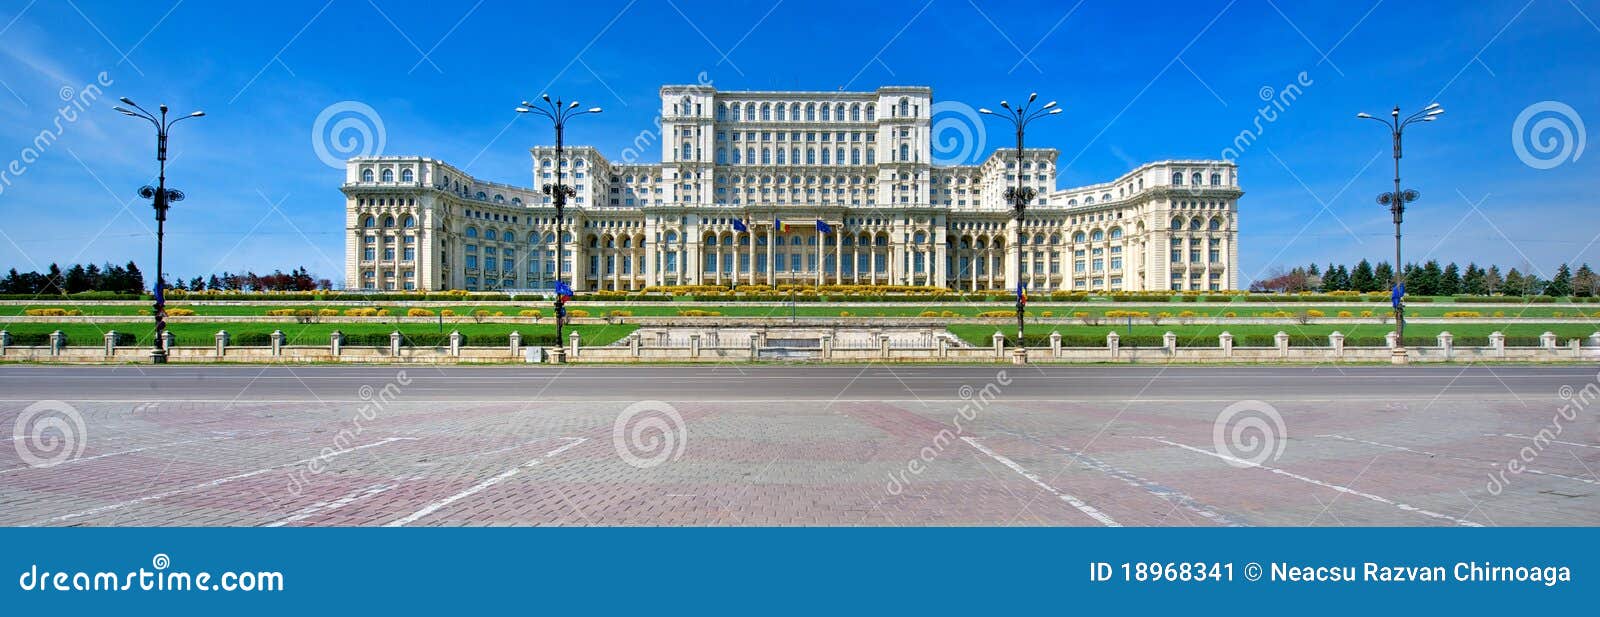 palace of the parliament, bucharest